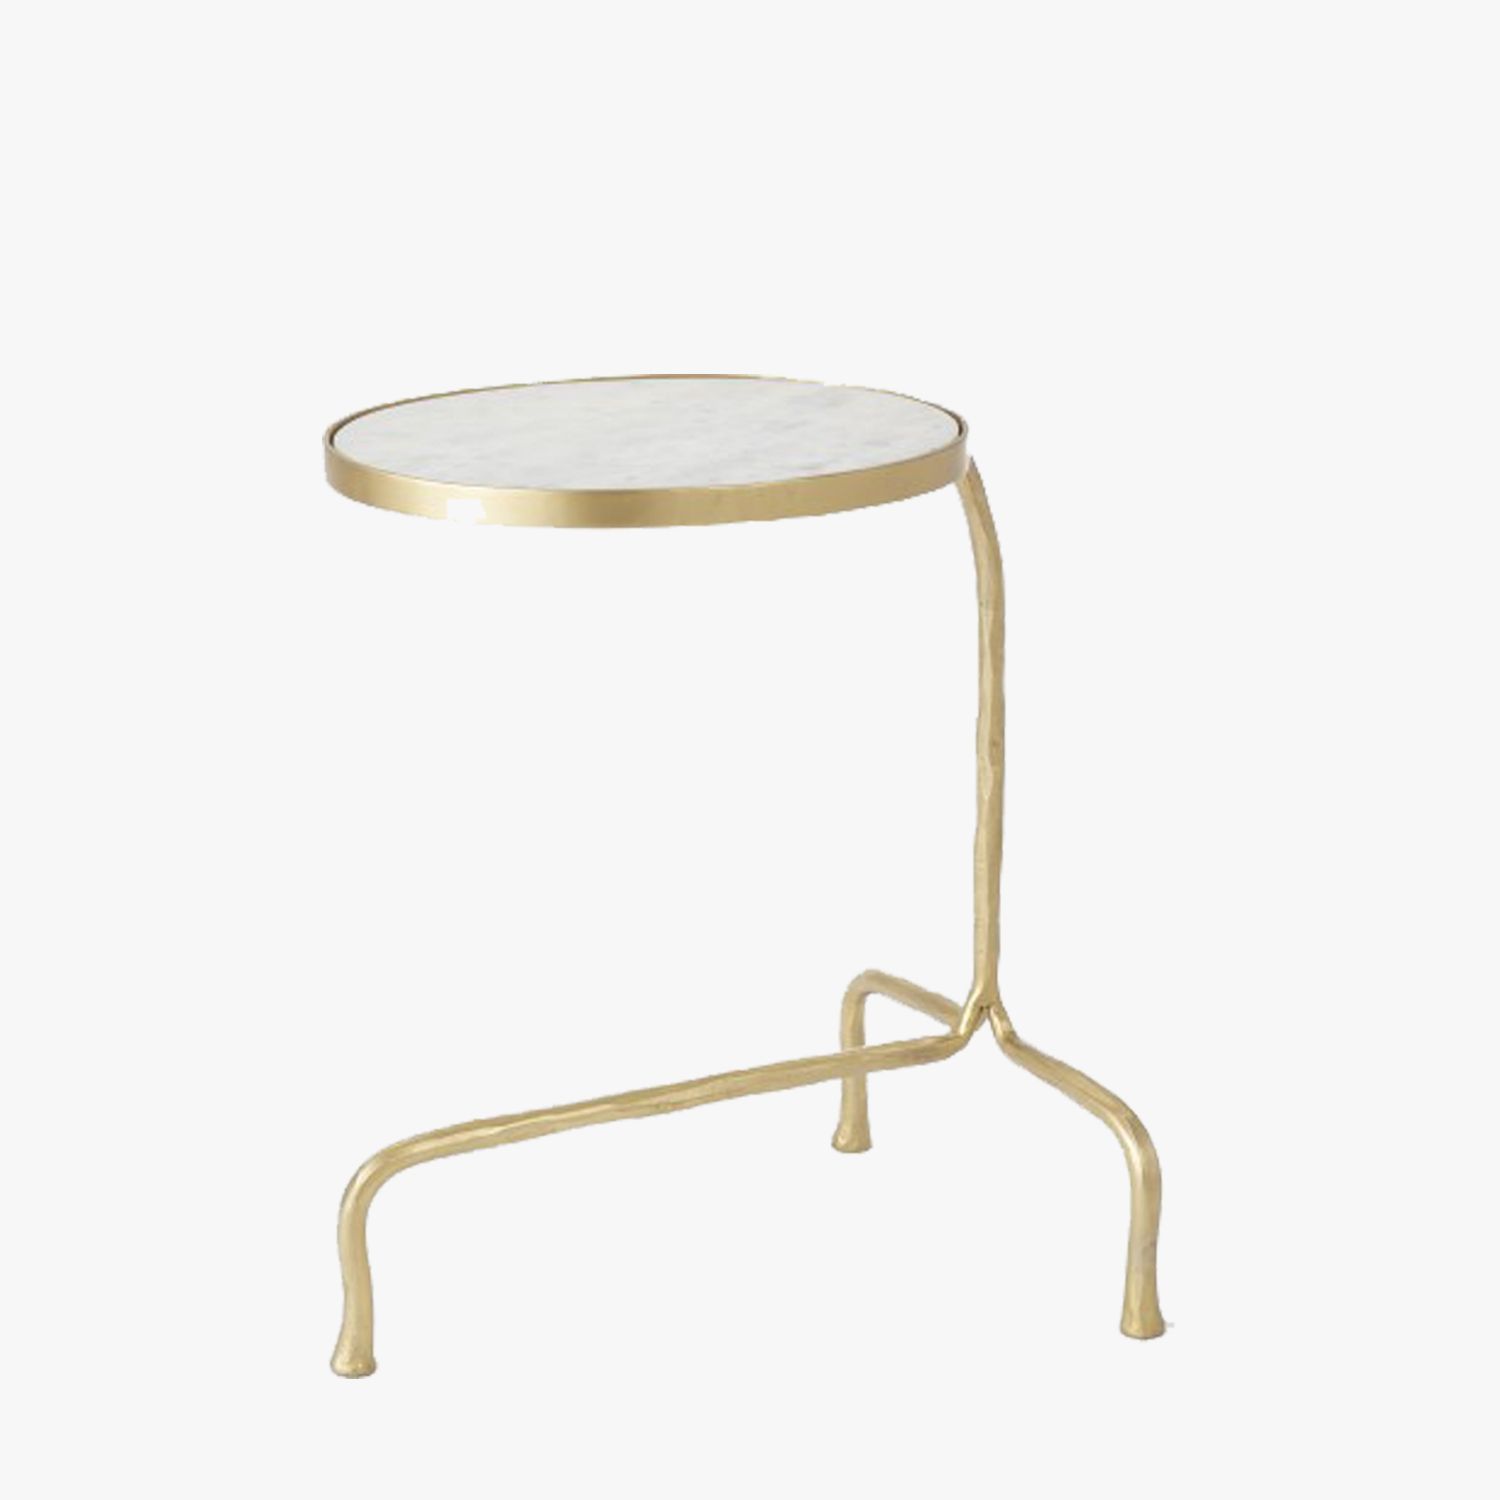 cantilever brass accent table marble top and marbles small topaccent decorative accessories cocktail decor outside tables unique metal coffee floor length mirror bedroom ideas